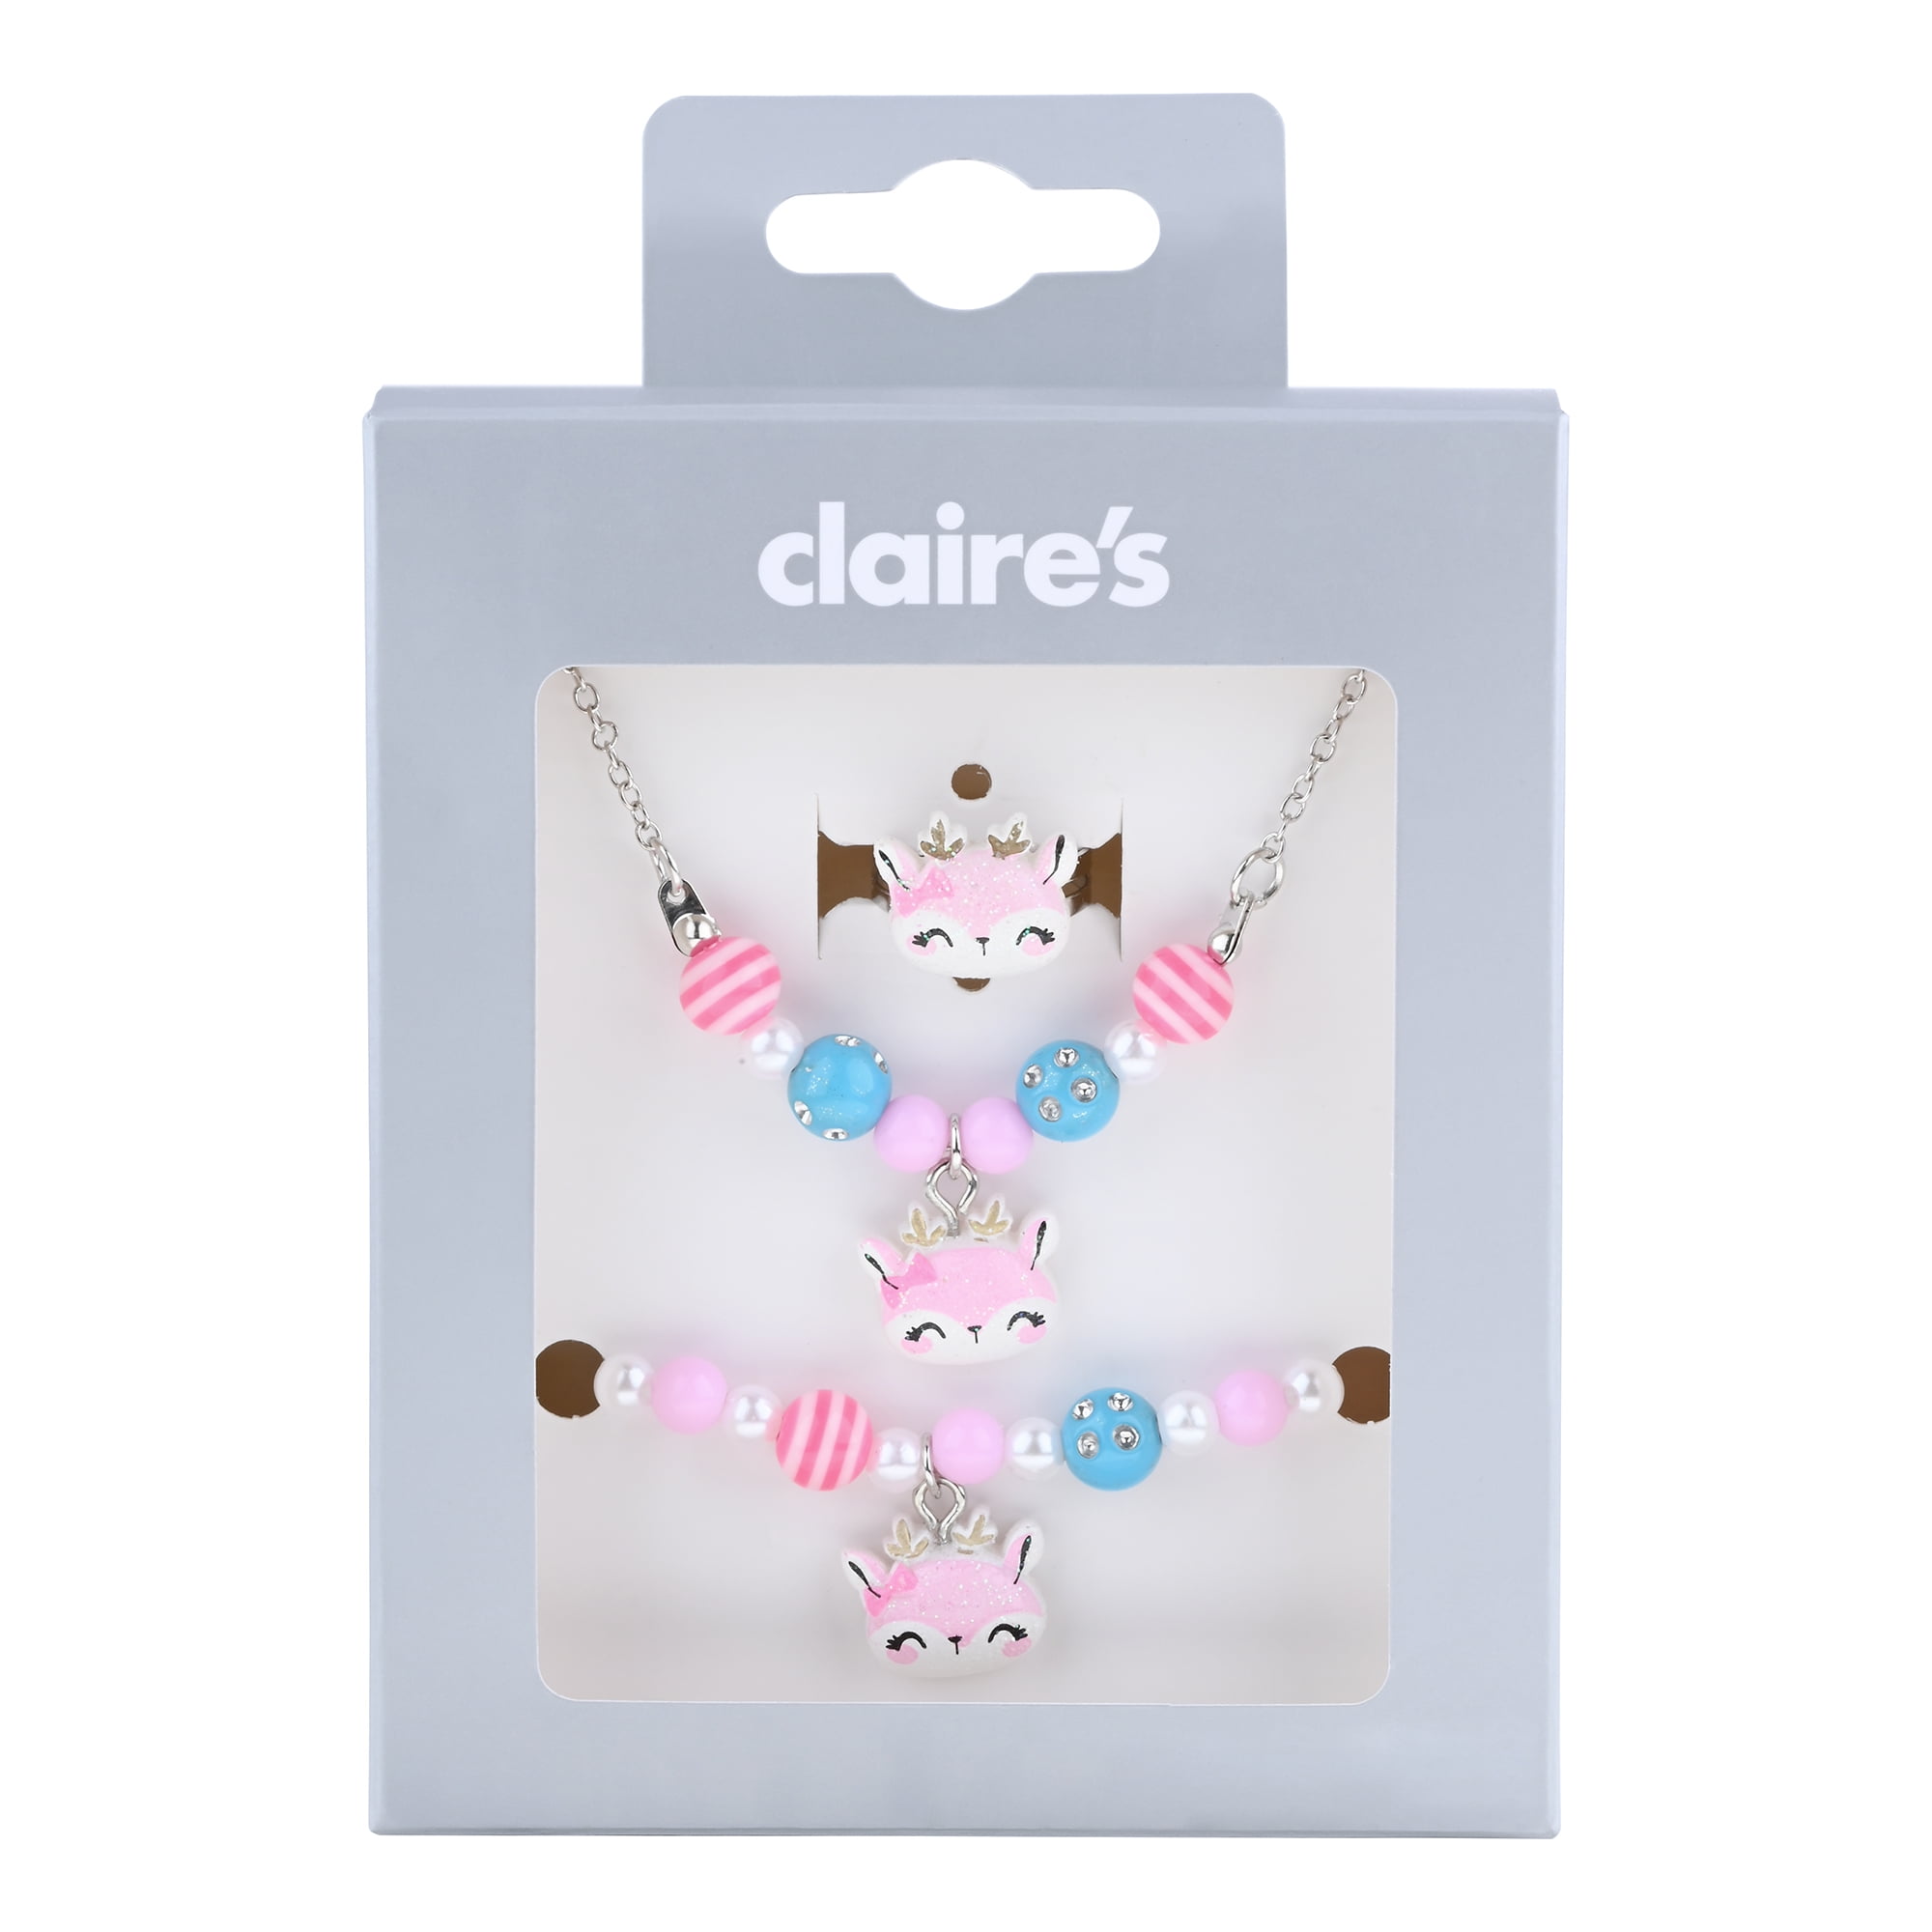 Claire's Tween Pink Deer Purse and Matching Jewelry Set, Gift for Girls, 7  Pieces 